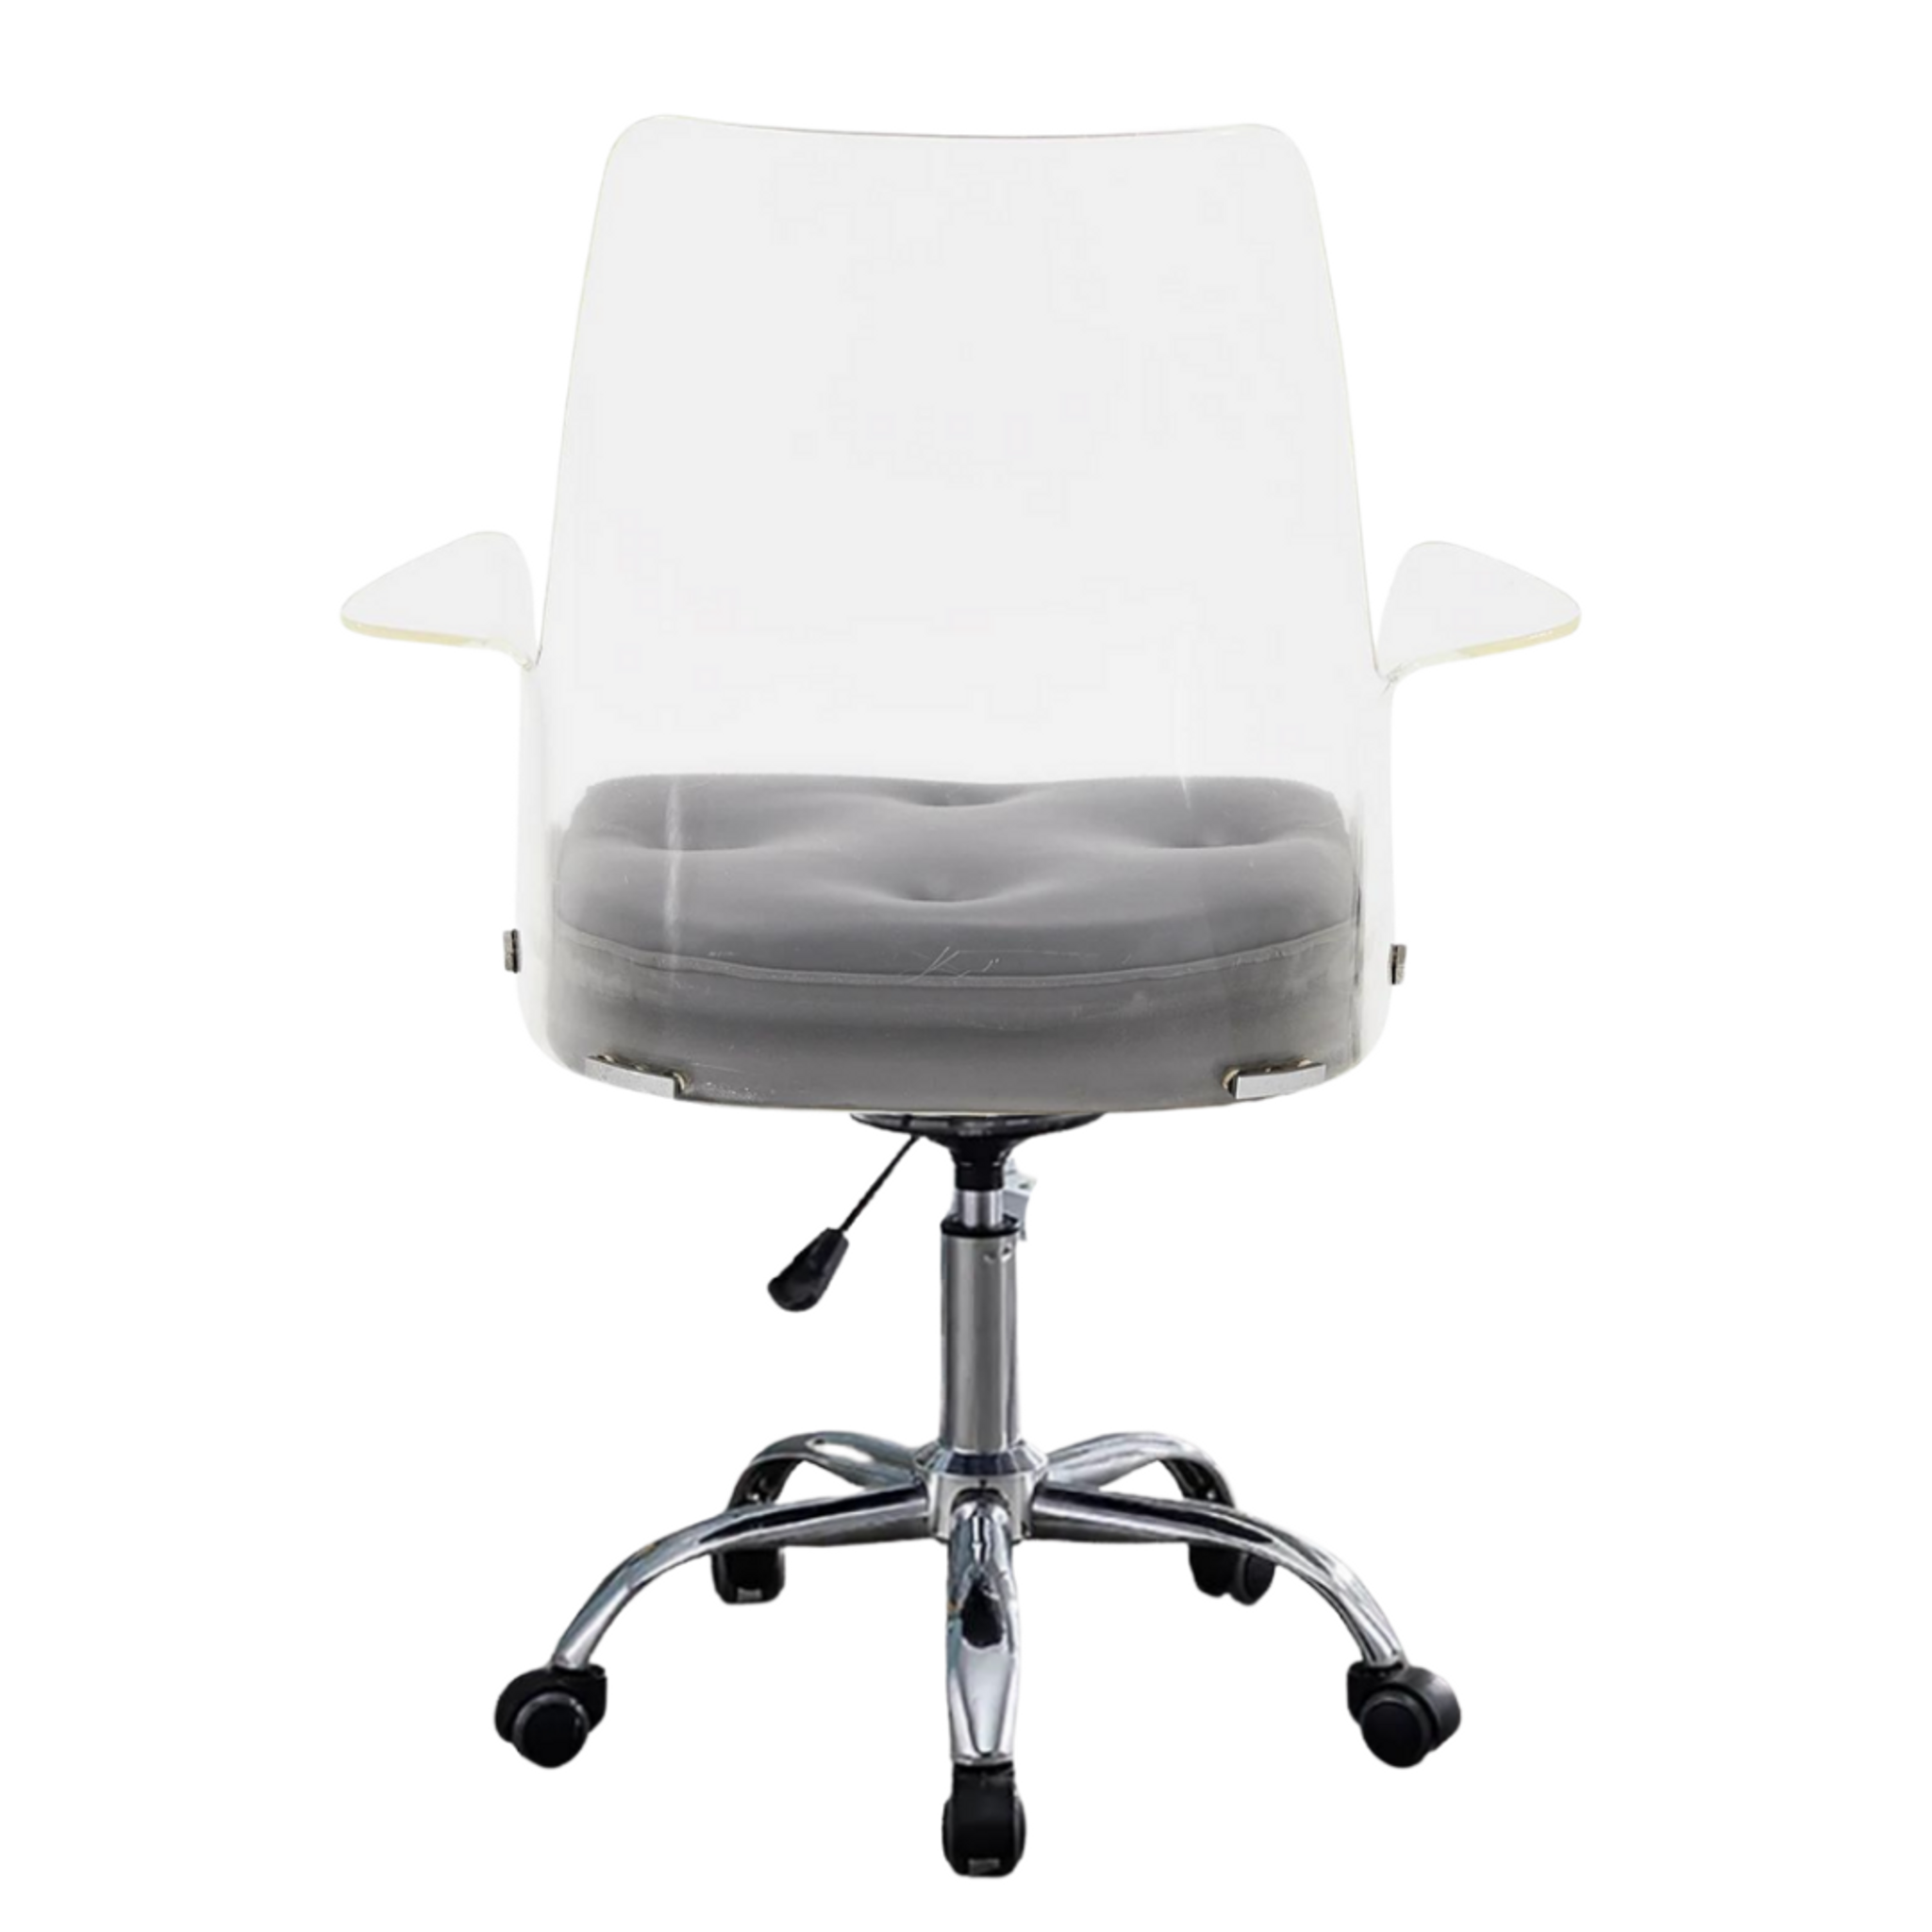 Clear Lucite Swivel Desk Chair with Flair Arms & Seat Cushion